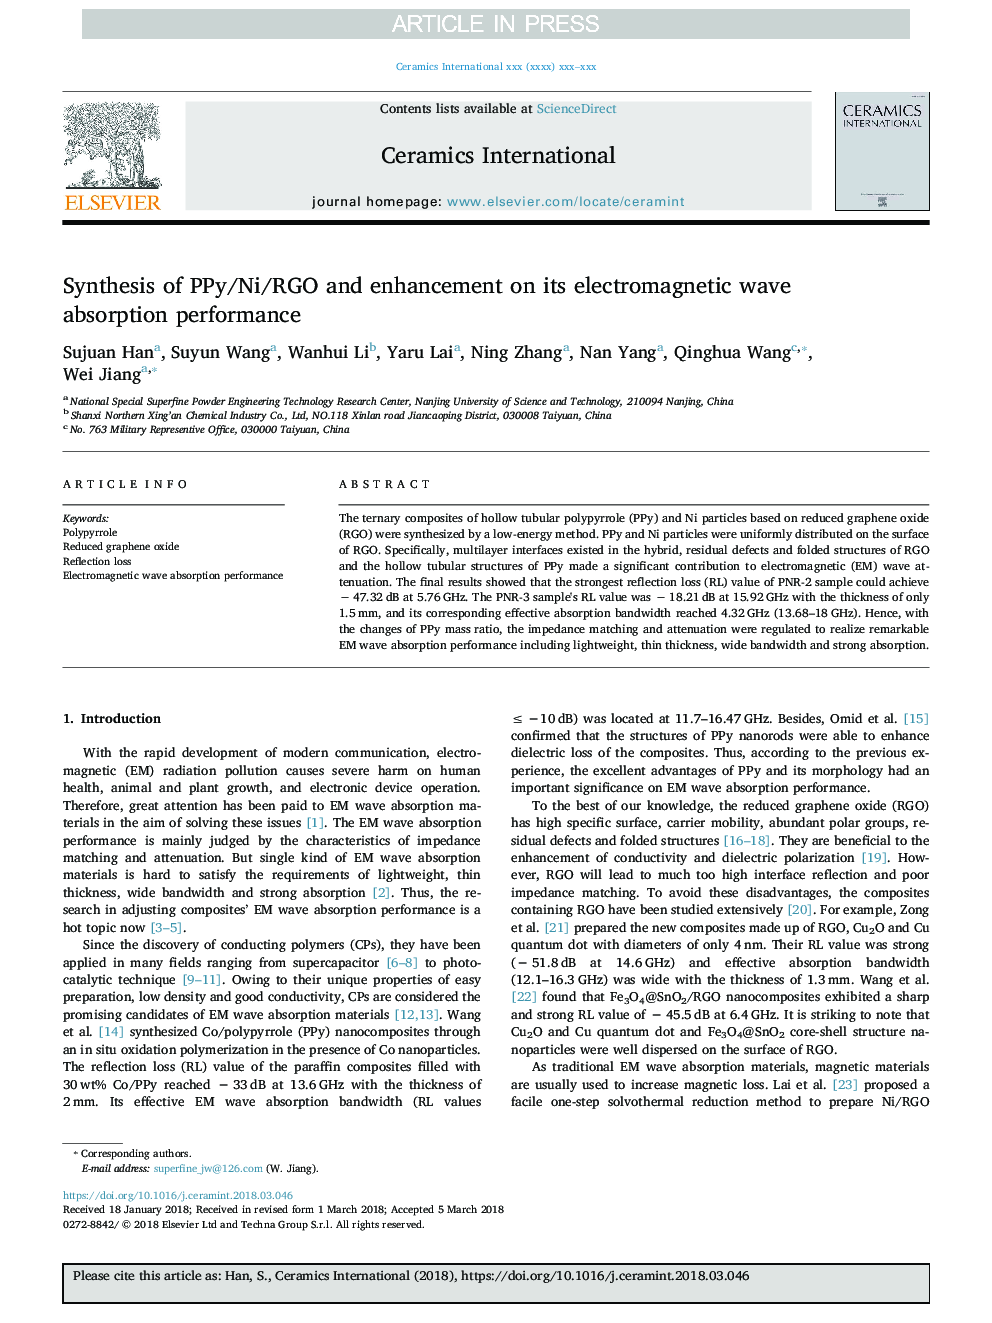 Synthesis of PPy/Ni/RGO and enhancement on its electromagnetic wave absorption performance